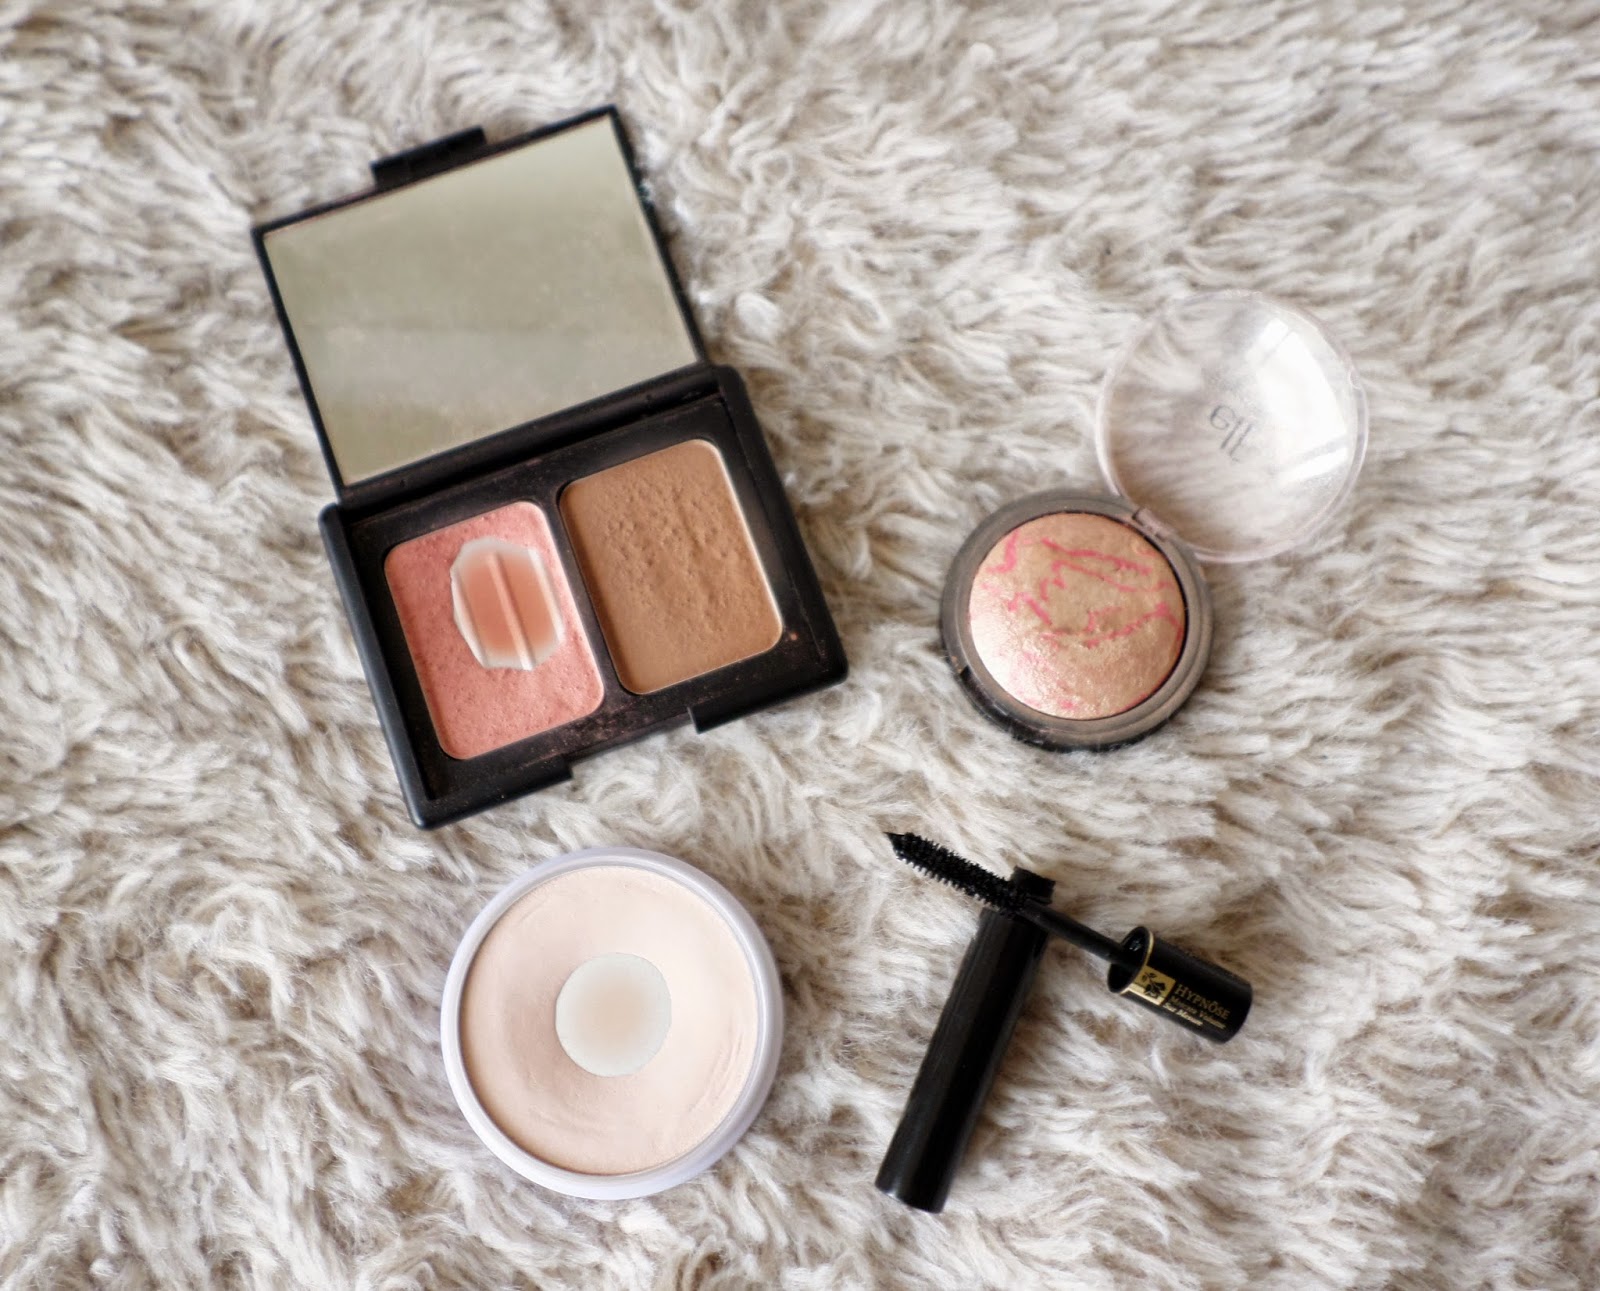 August Beauty Favourites Featuring Soap & Glory, Organic Surge, Natural Collection, ELF Cosmetics and L'ancome